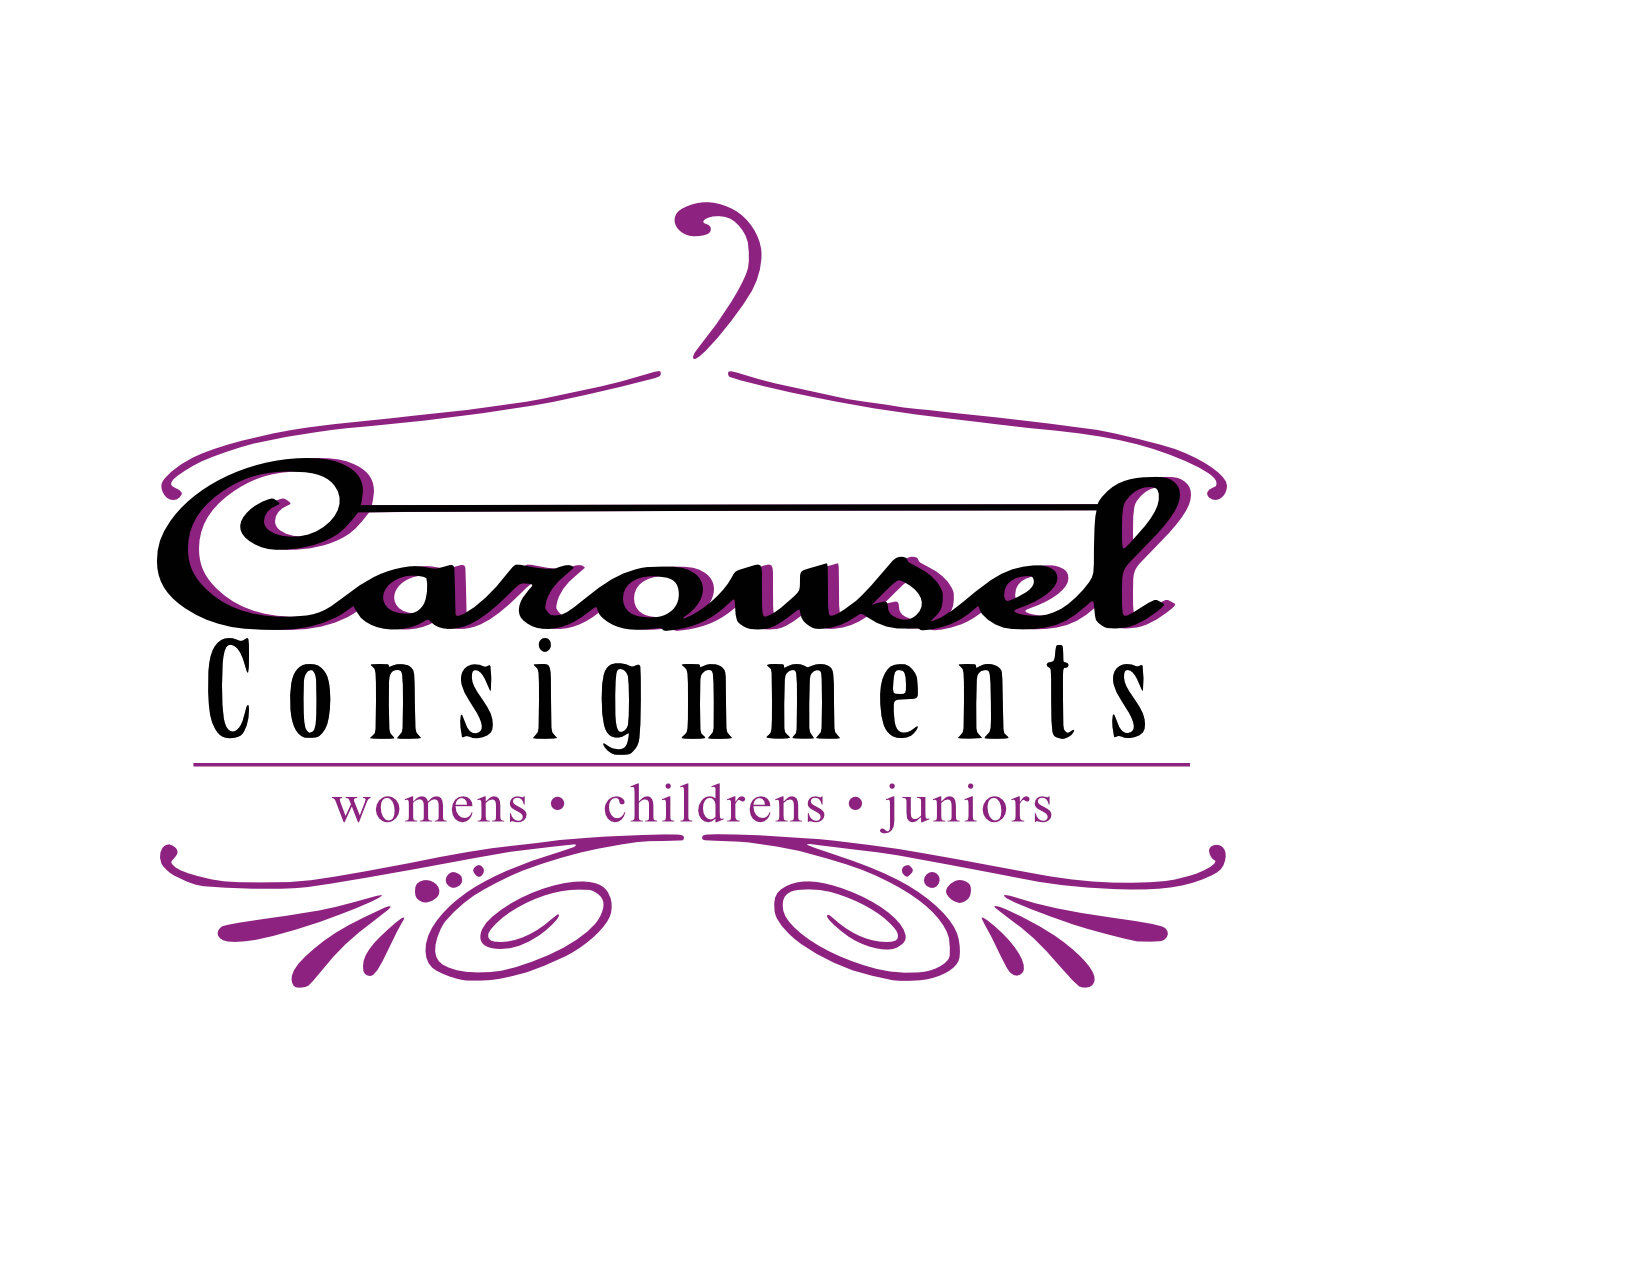 Carousel Consignments